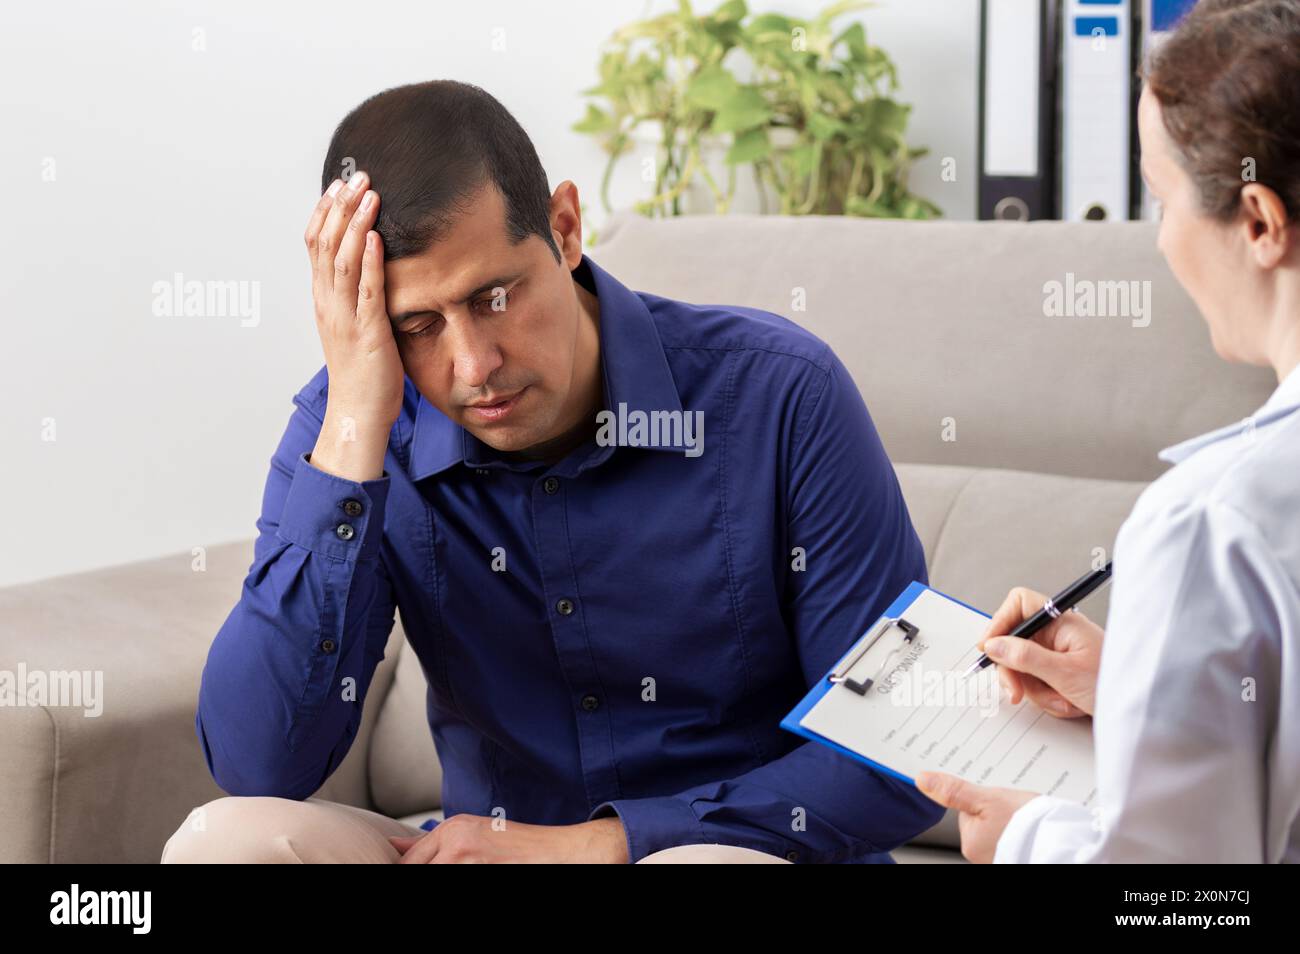 Distraught businessman holds his head in his hands while speaking to a healthcare professional. Stock Photo